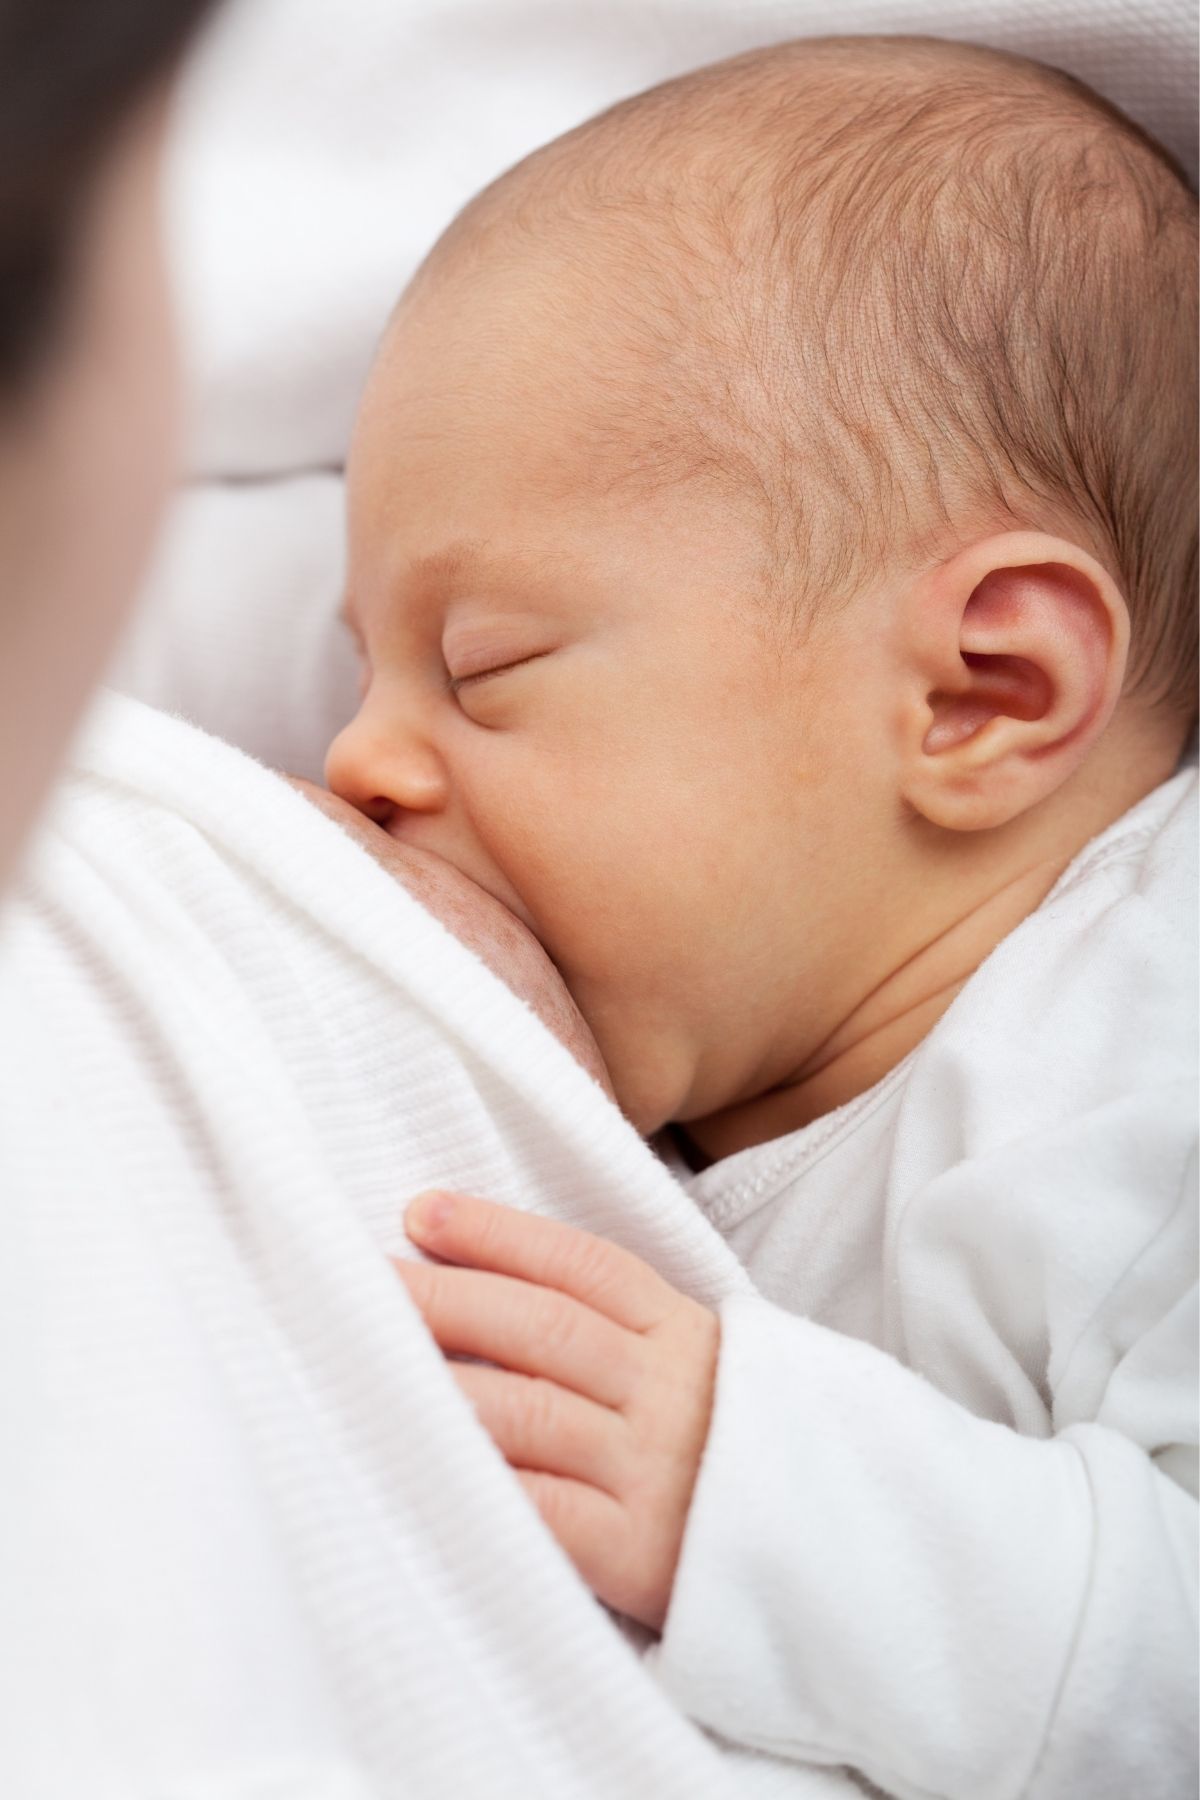 Newborn baby wearing white nurses with a proper latch with wide mouth and chin against breast.